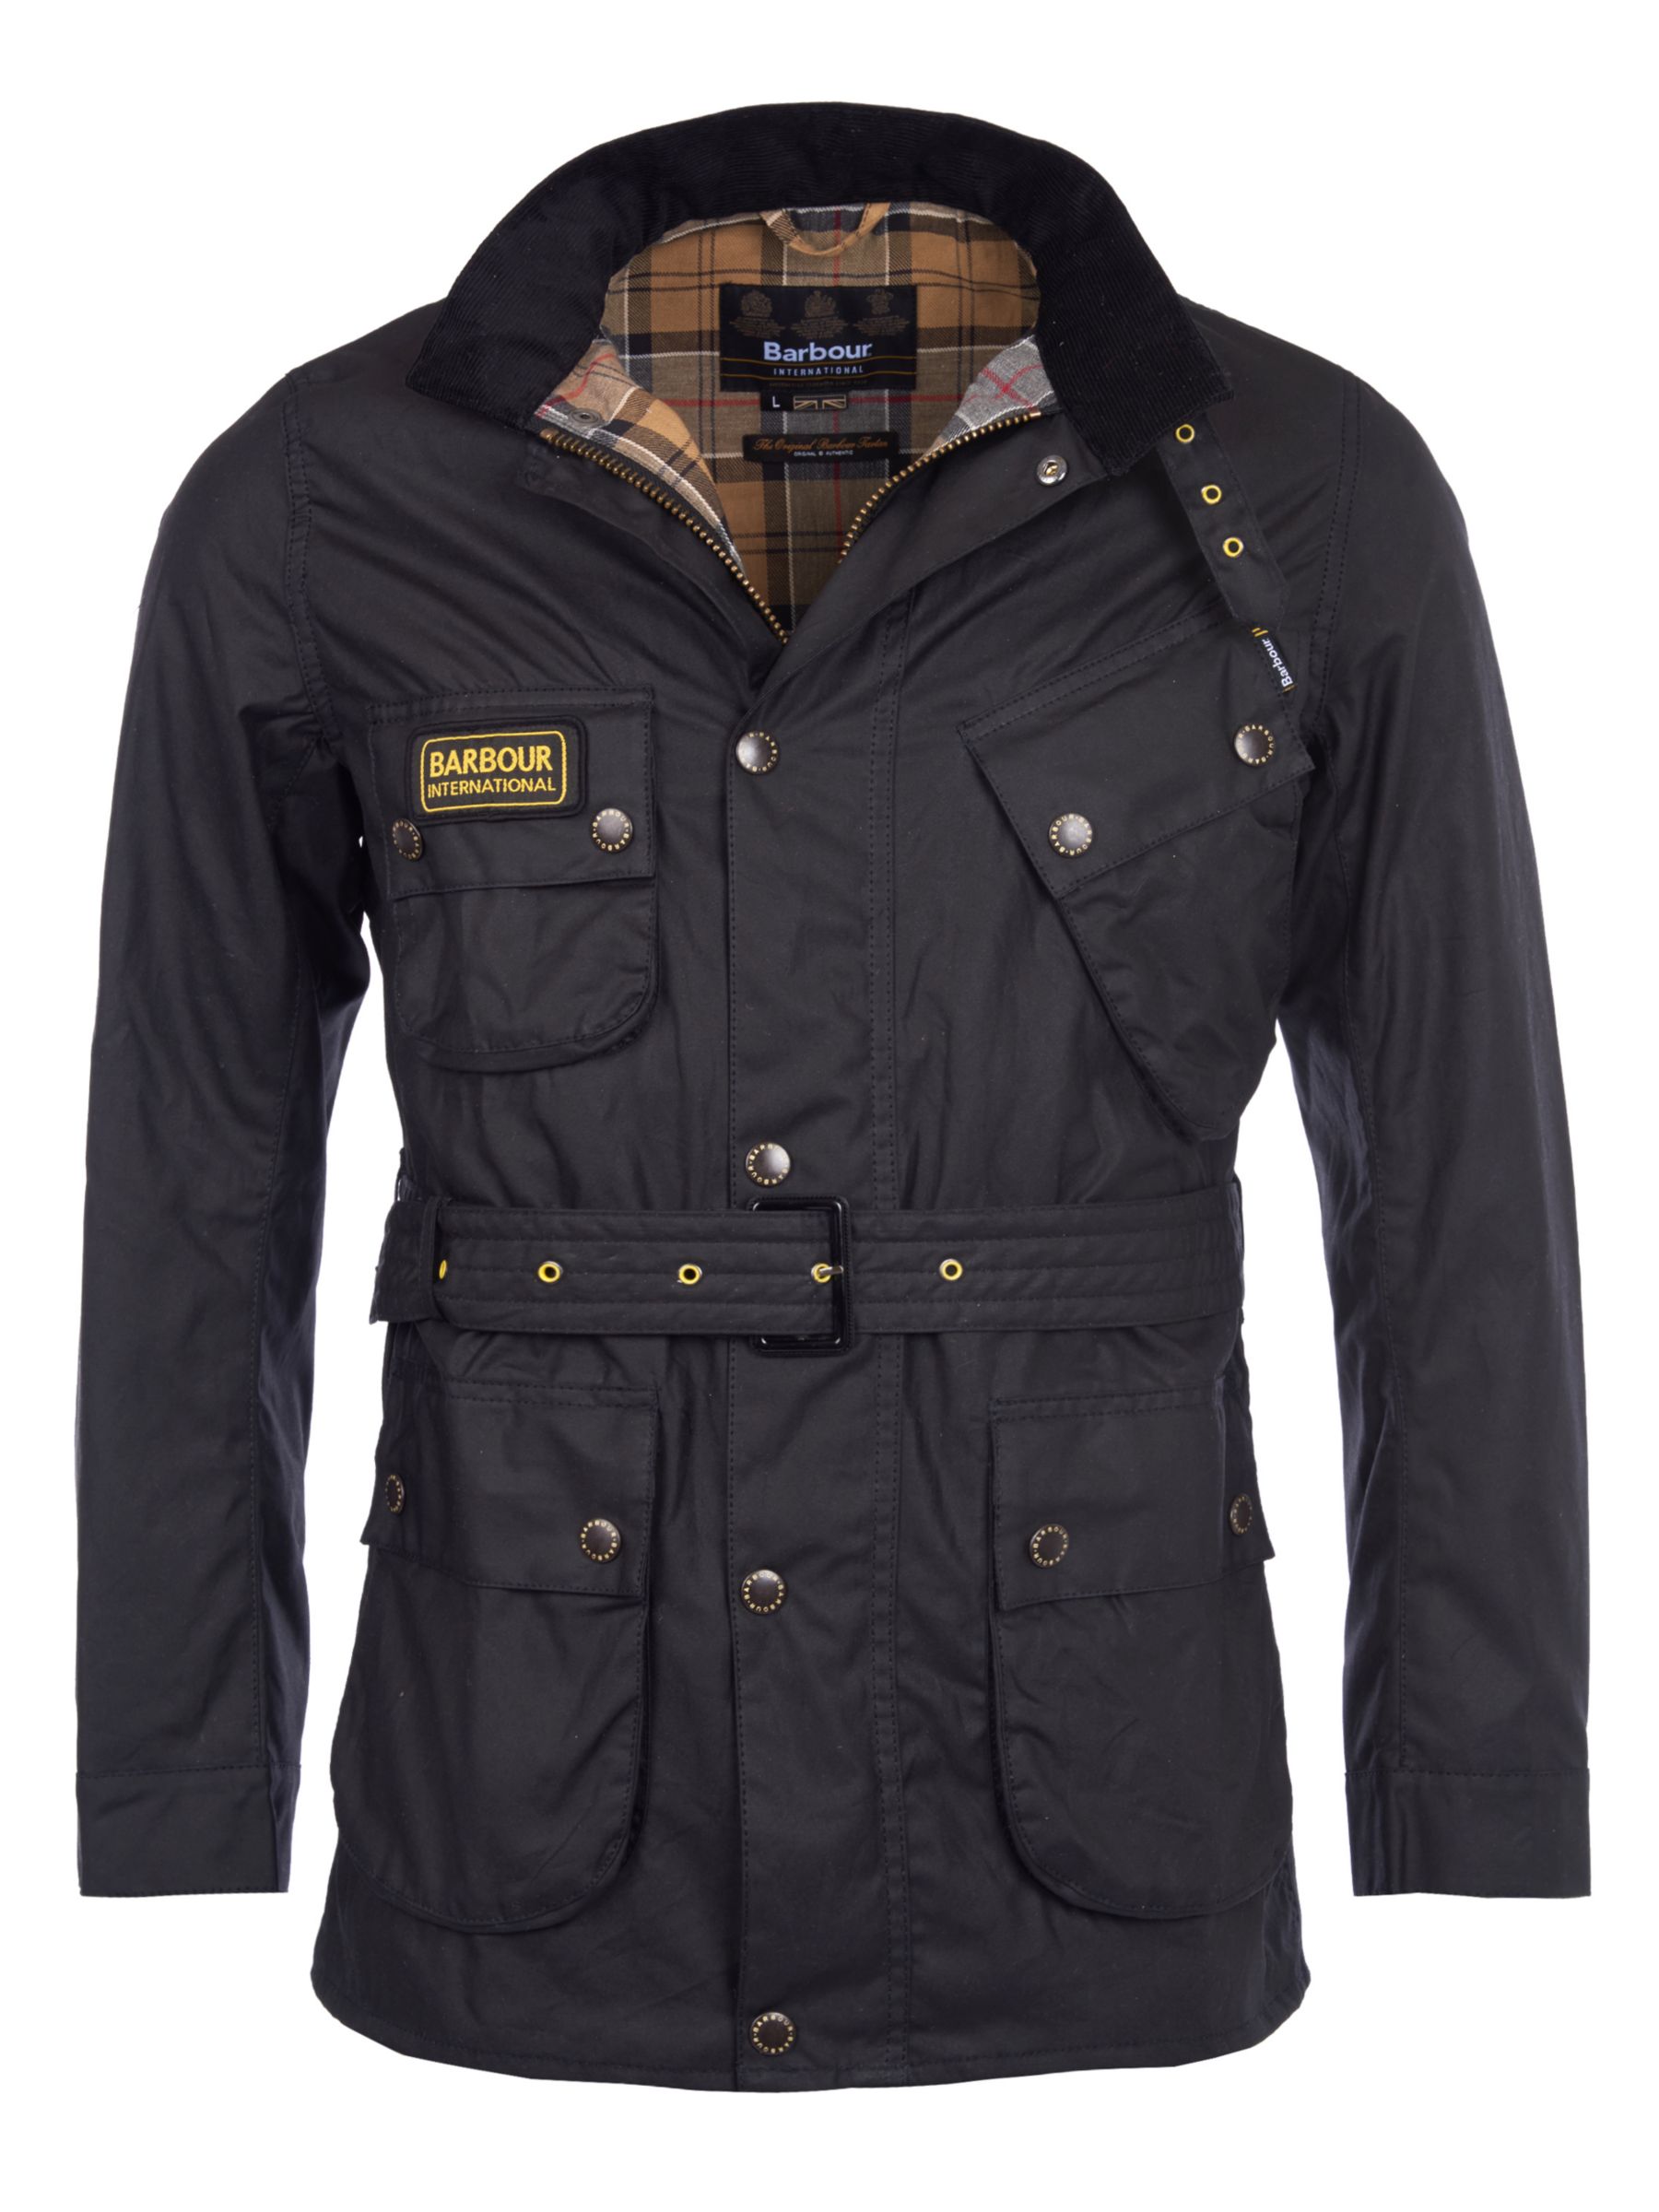 thin barbour jacket